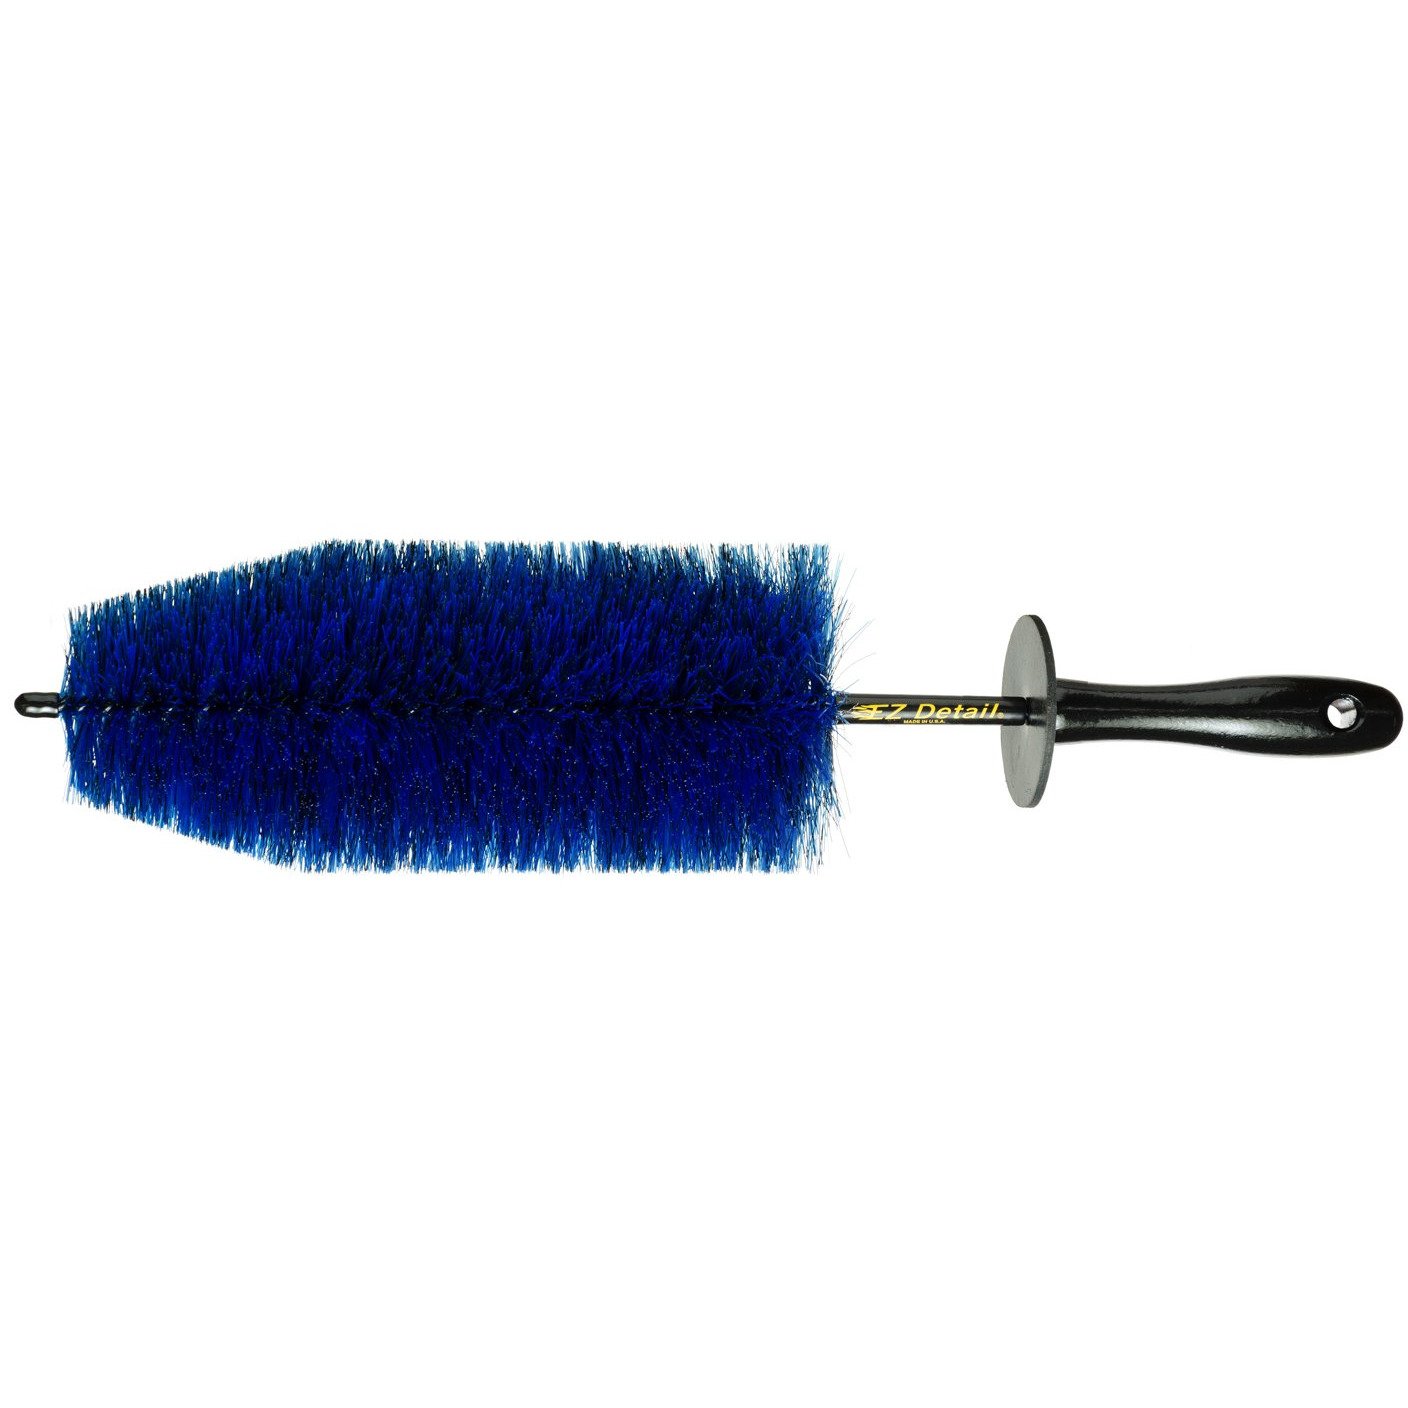 Wheel Well and Whitewall Cleaning Brush for Low-Profile Tires – Greenway's  Car Care Products